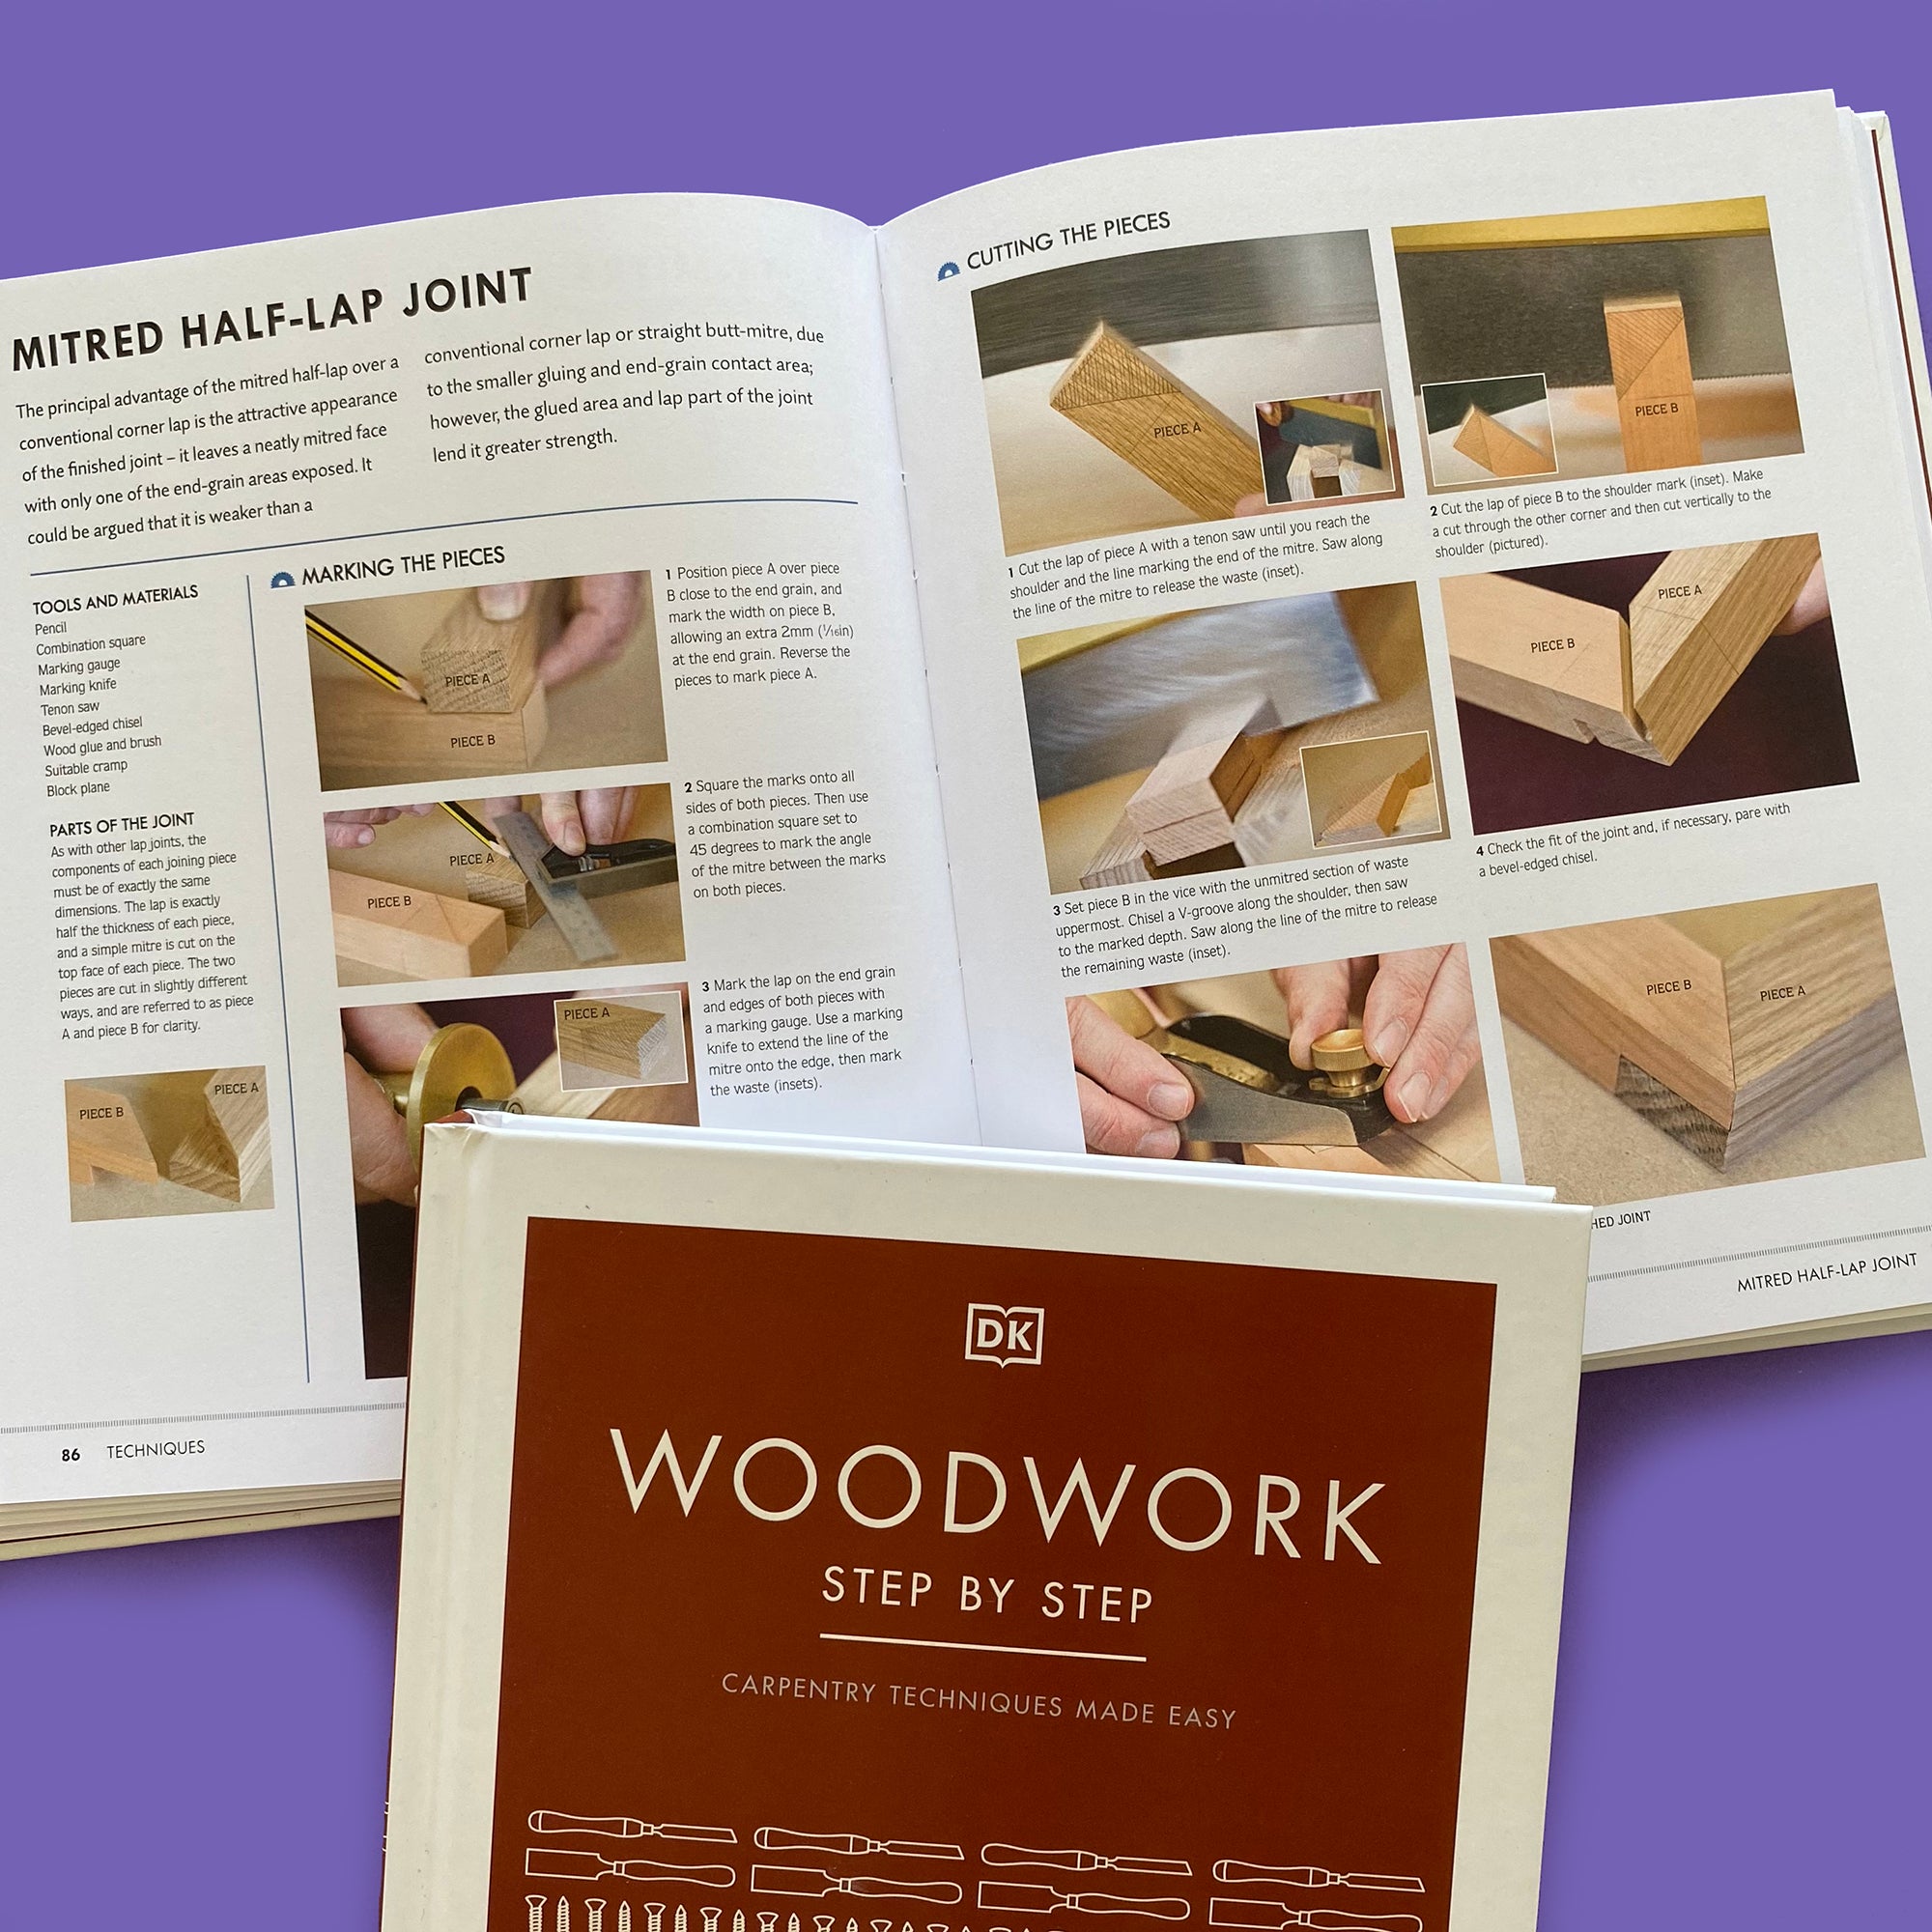 Woodwork Step-by-Step